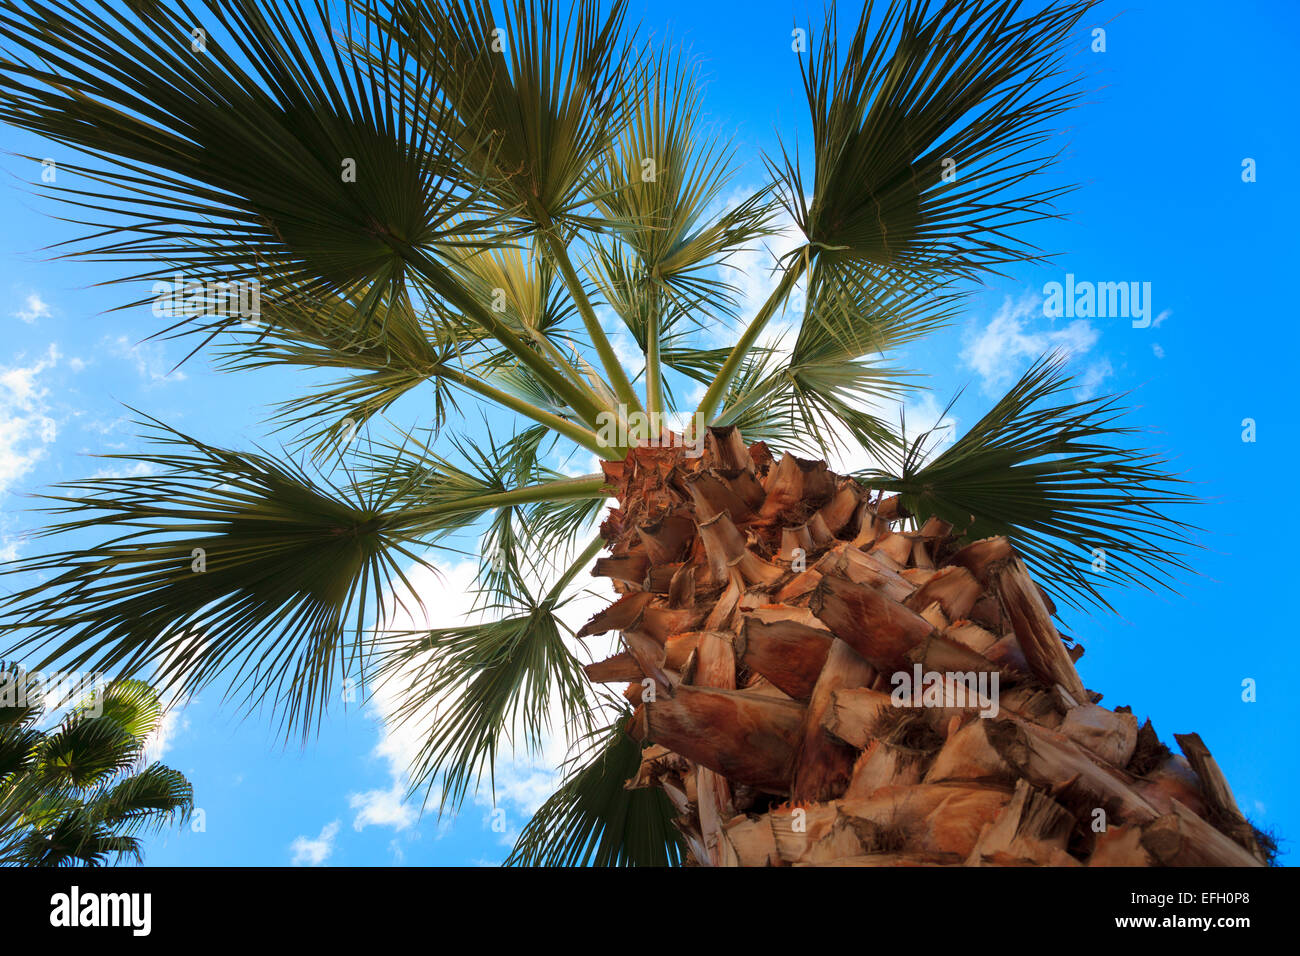 Looking up at fronds of palm tree against sky Stock Photo